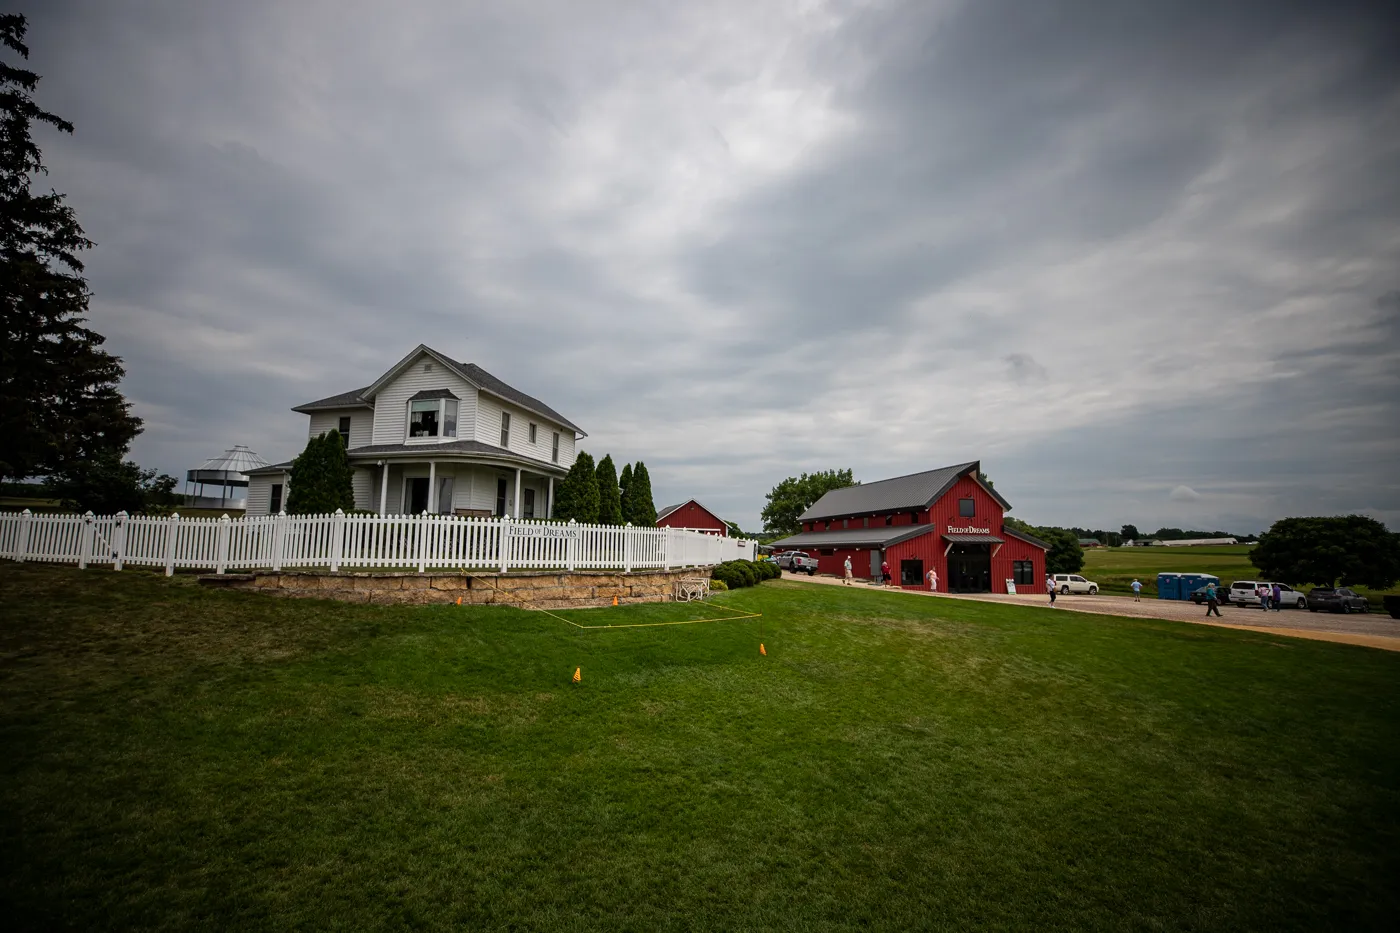 Farm house at the Field of Dreams Movie Site in Dyersville, Iowa